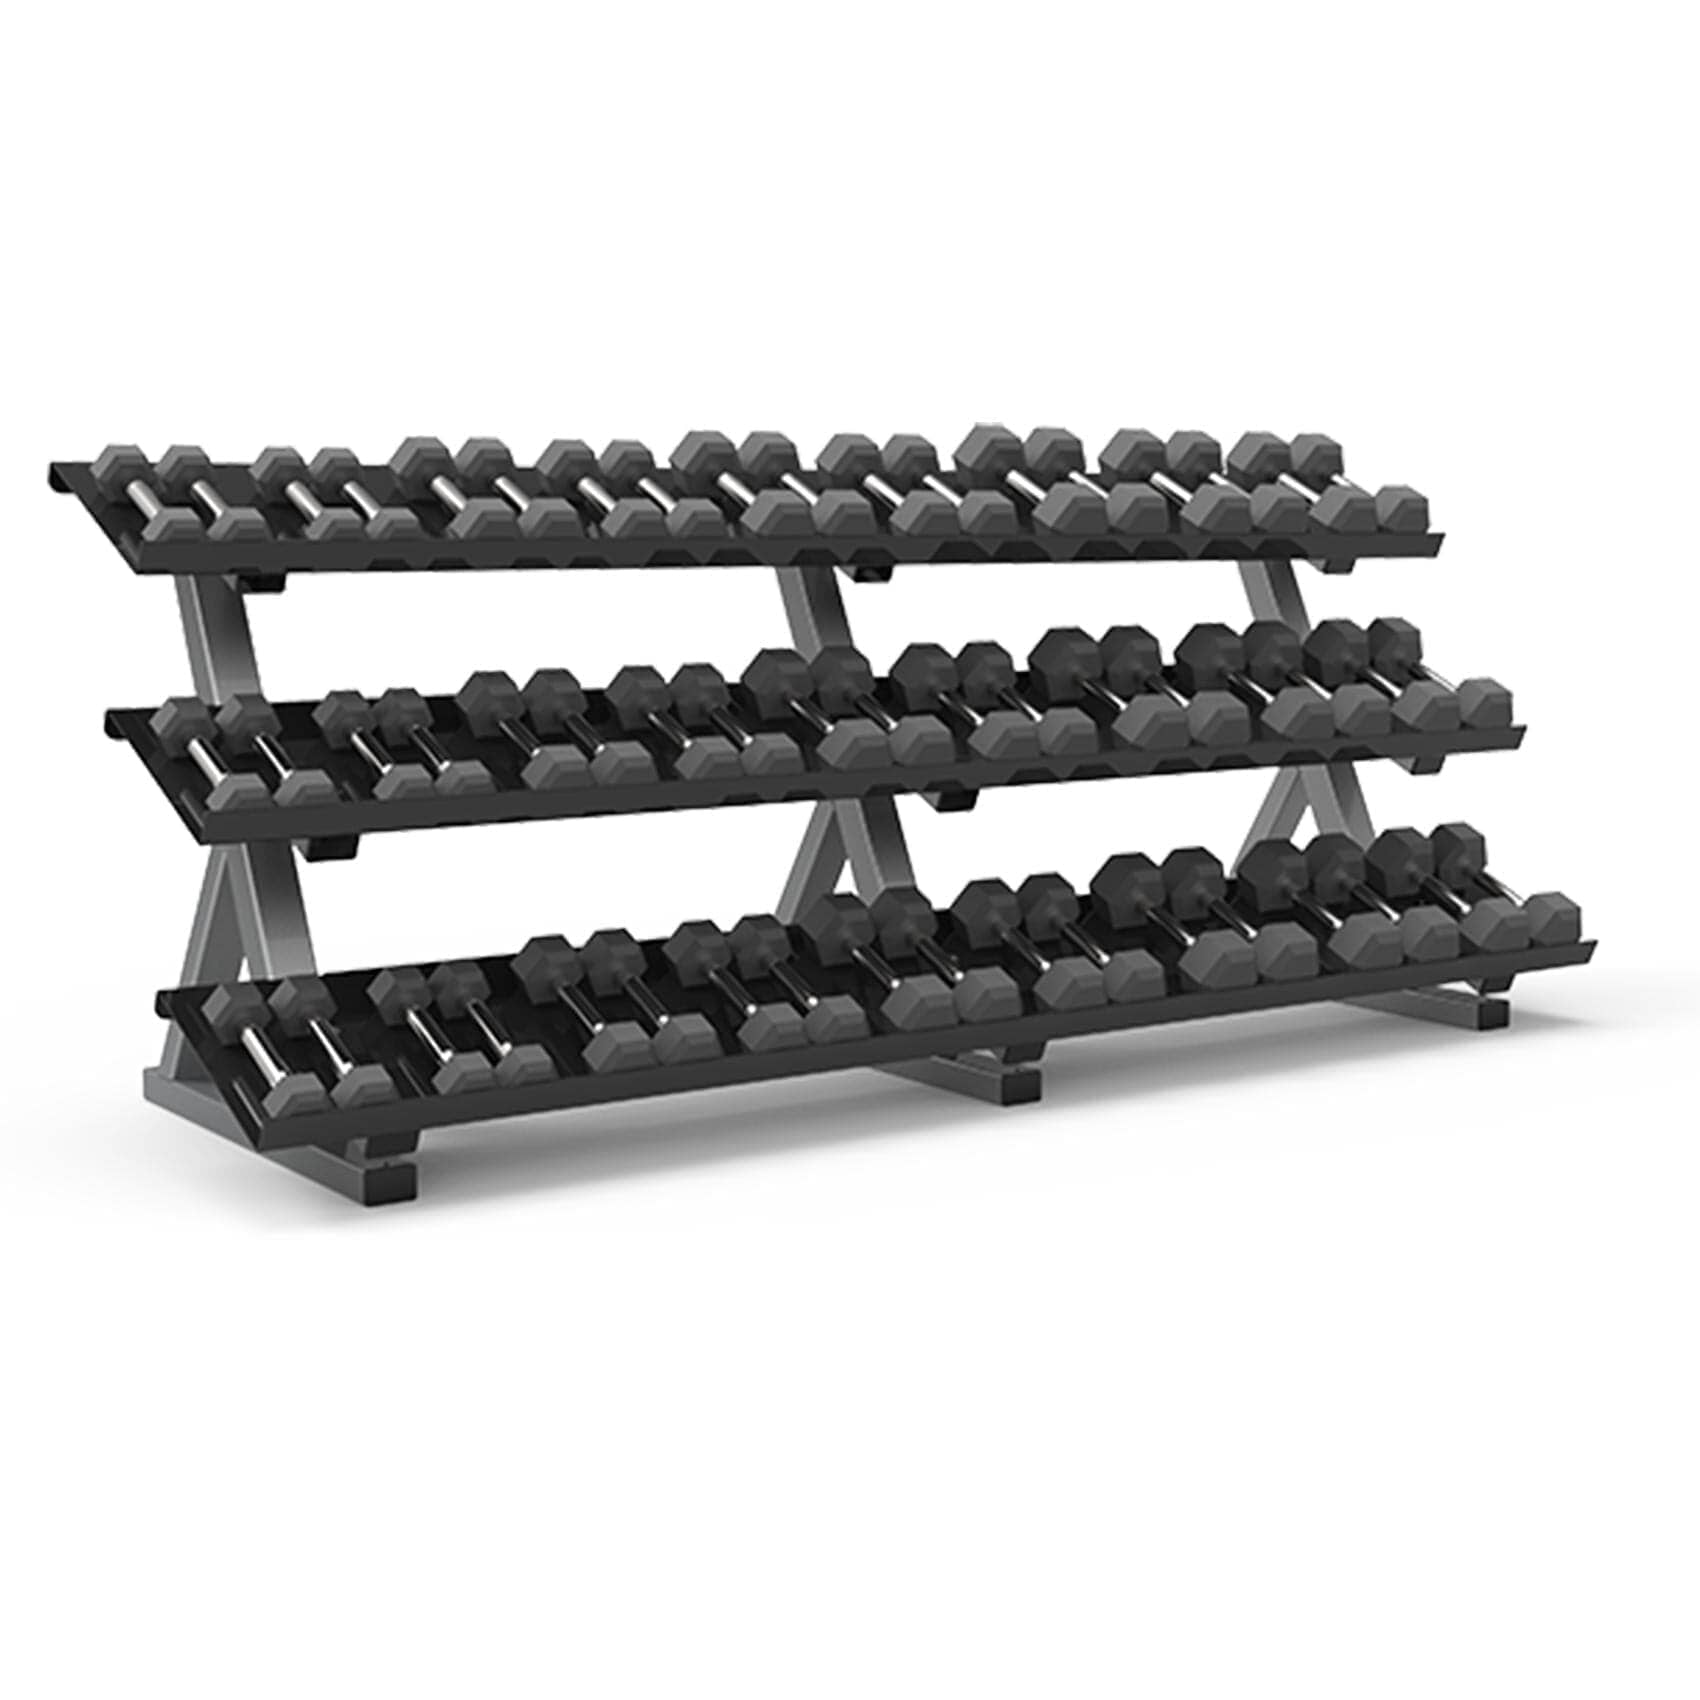 Freemotion Hex Dumbbell Rack (FMDY509083) Weight Storage Freemotion 